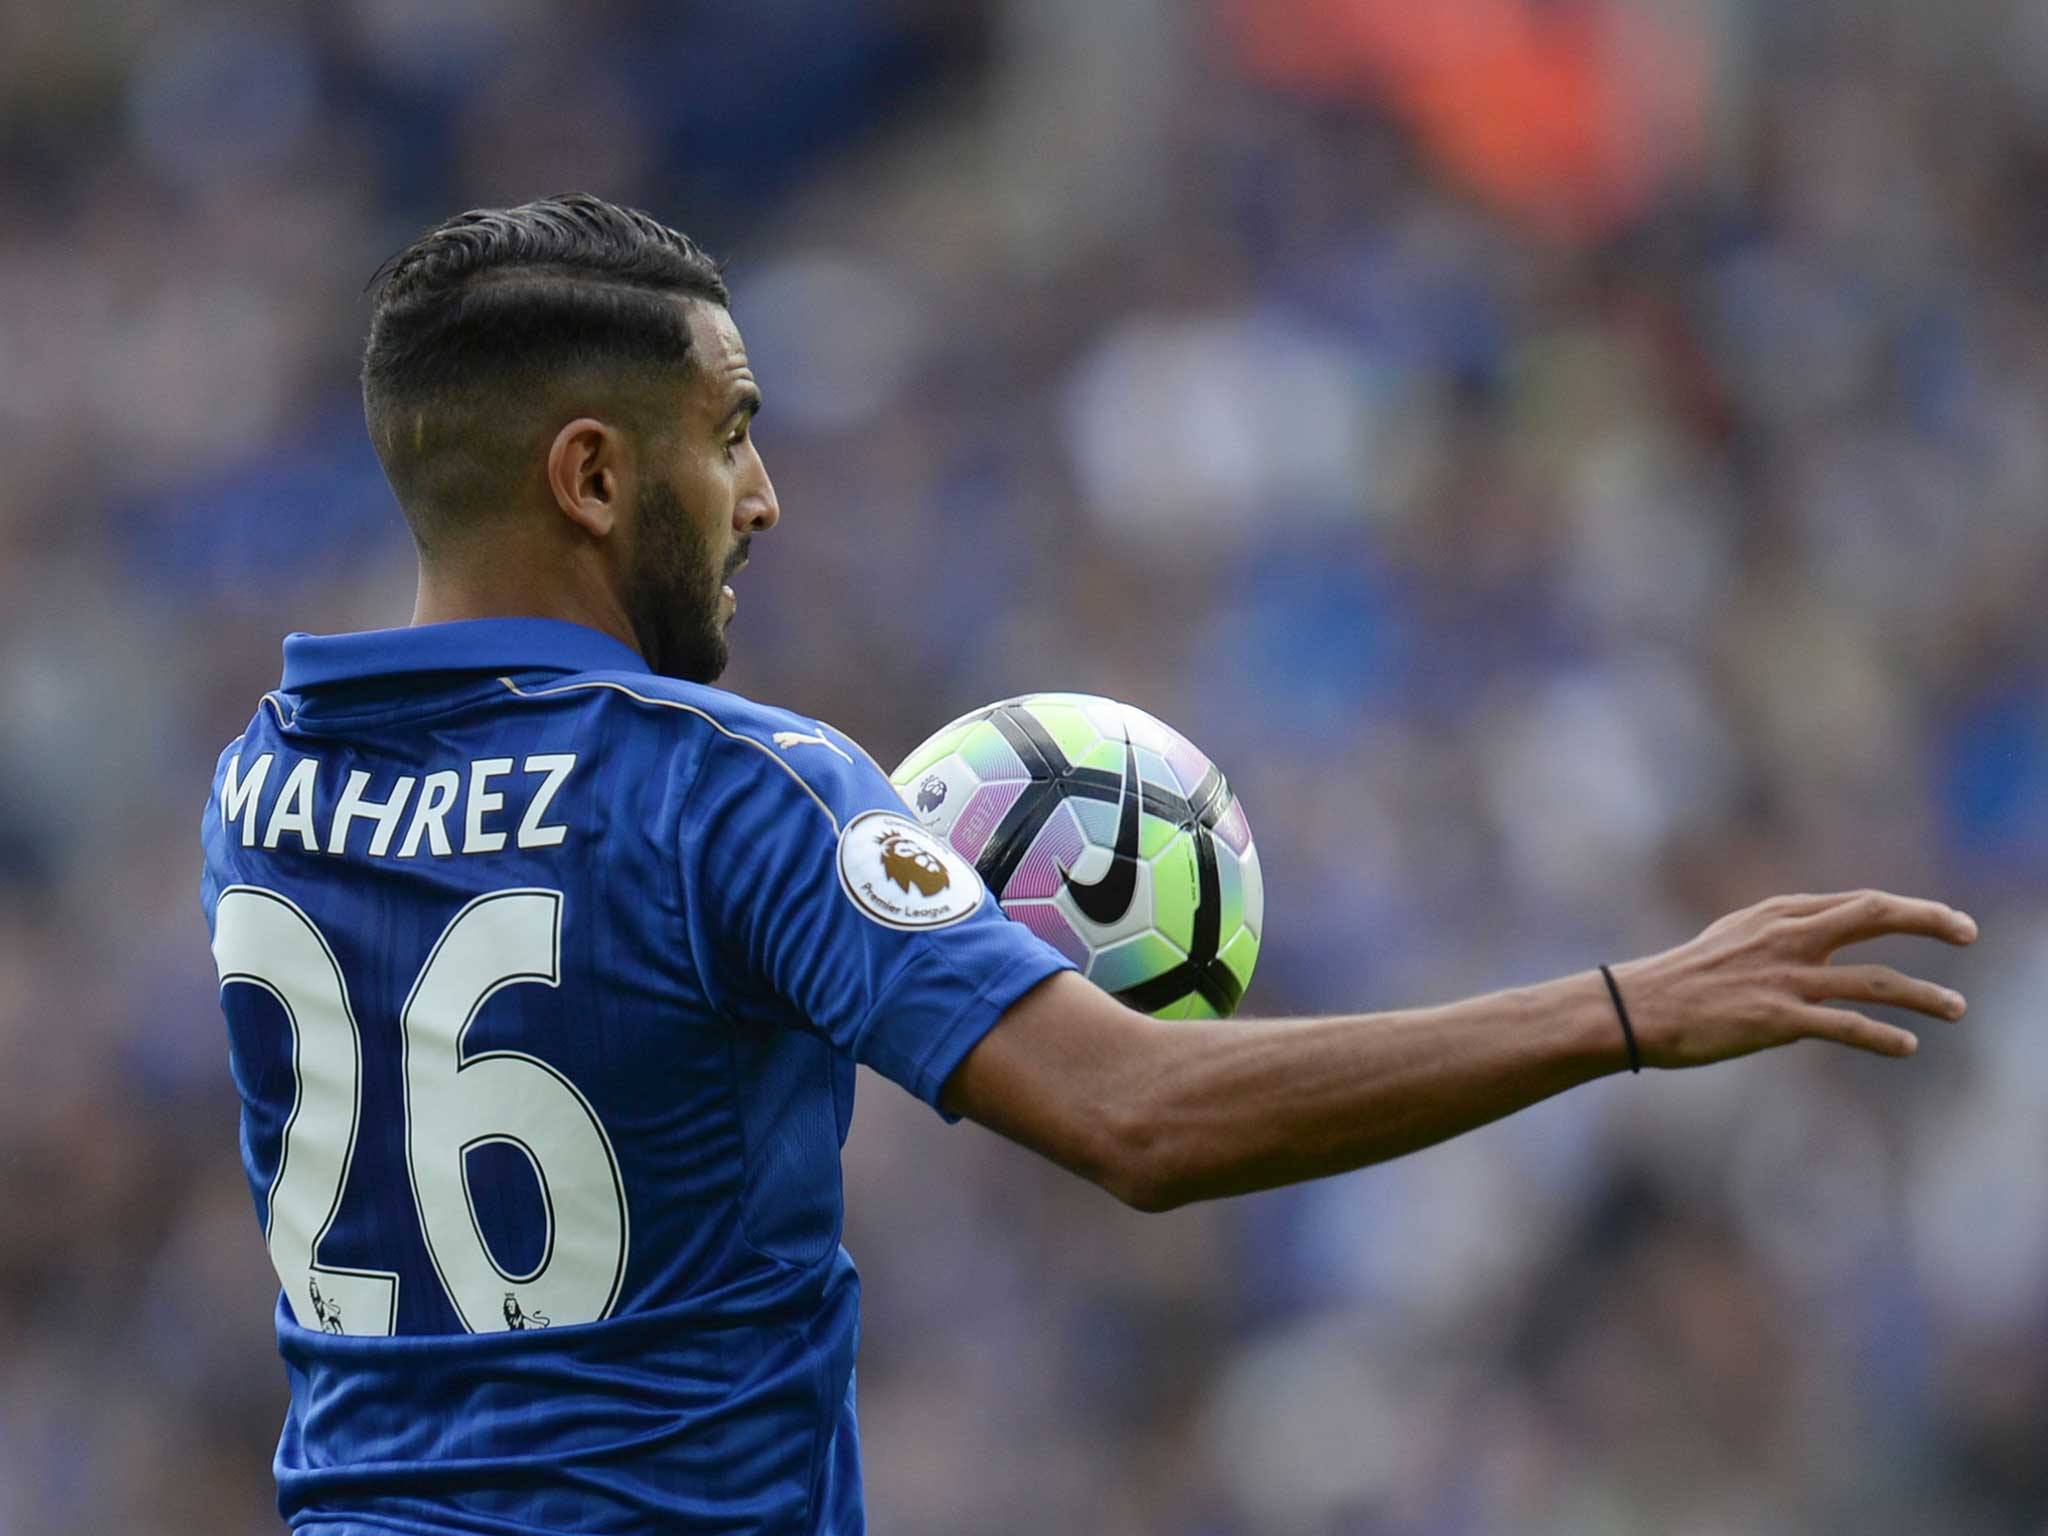 Riyad Mahrez signed a new contract with Leicester City this summer